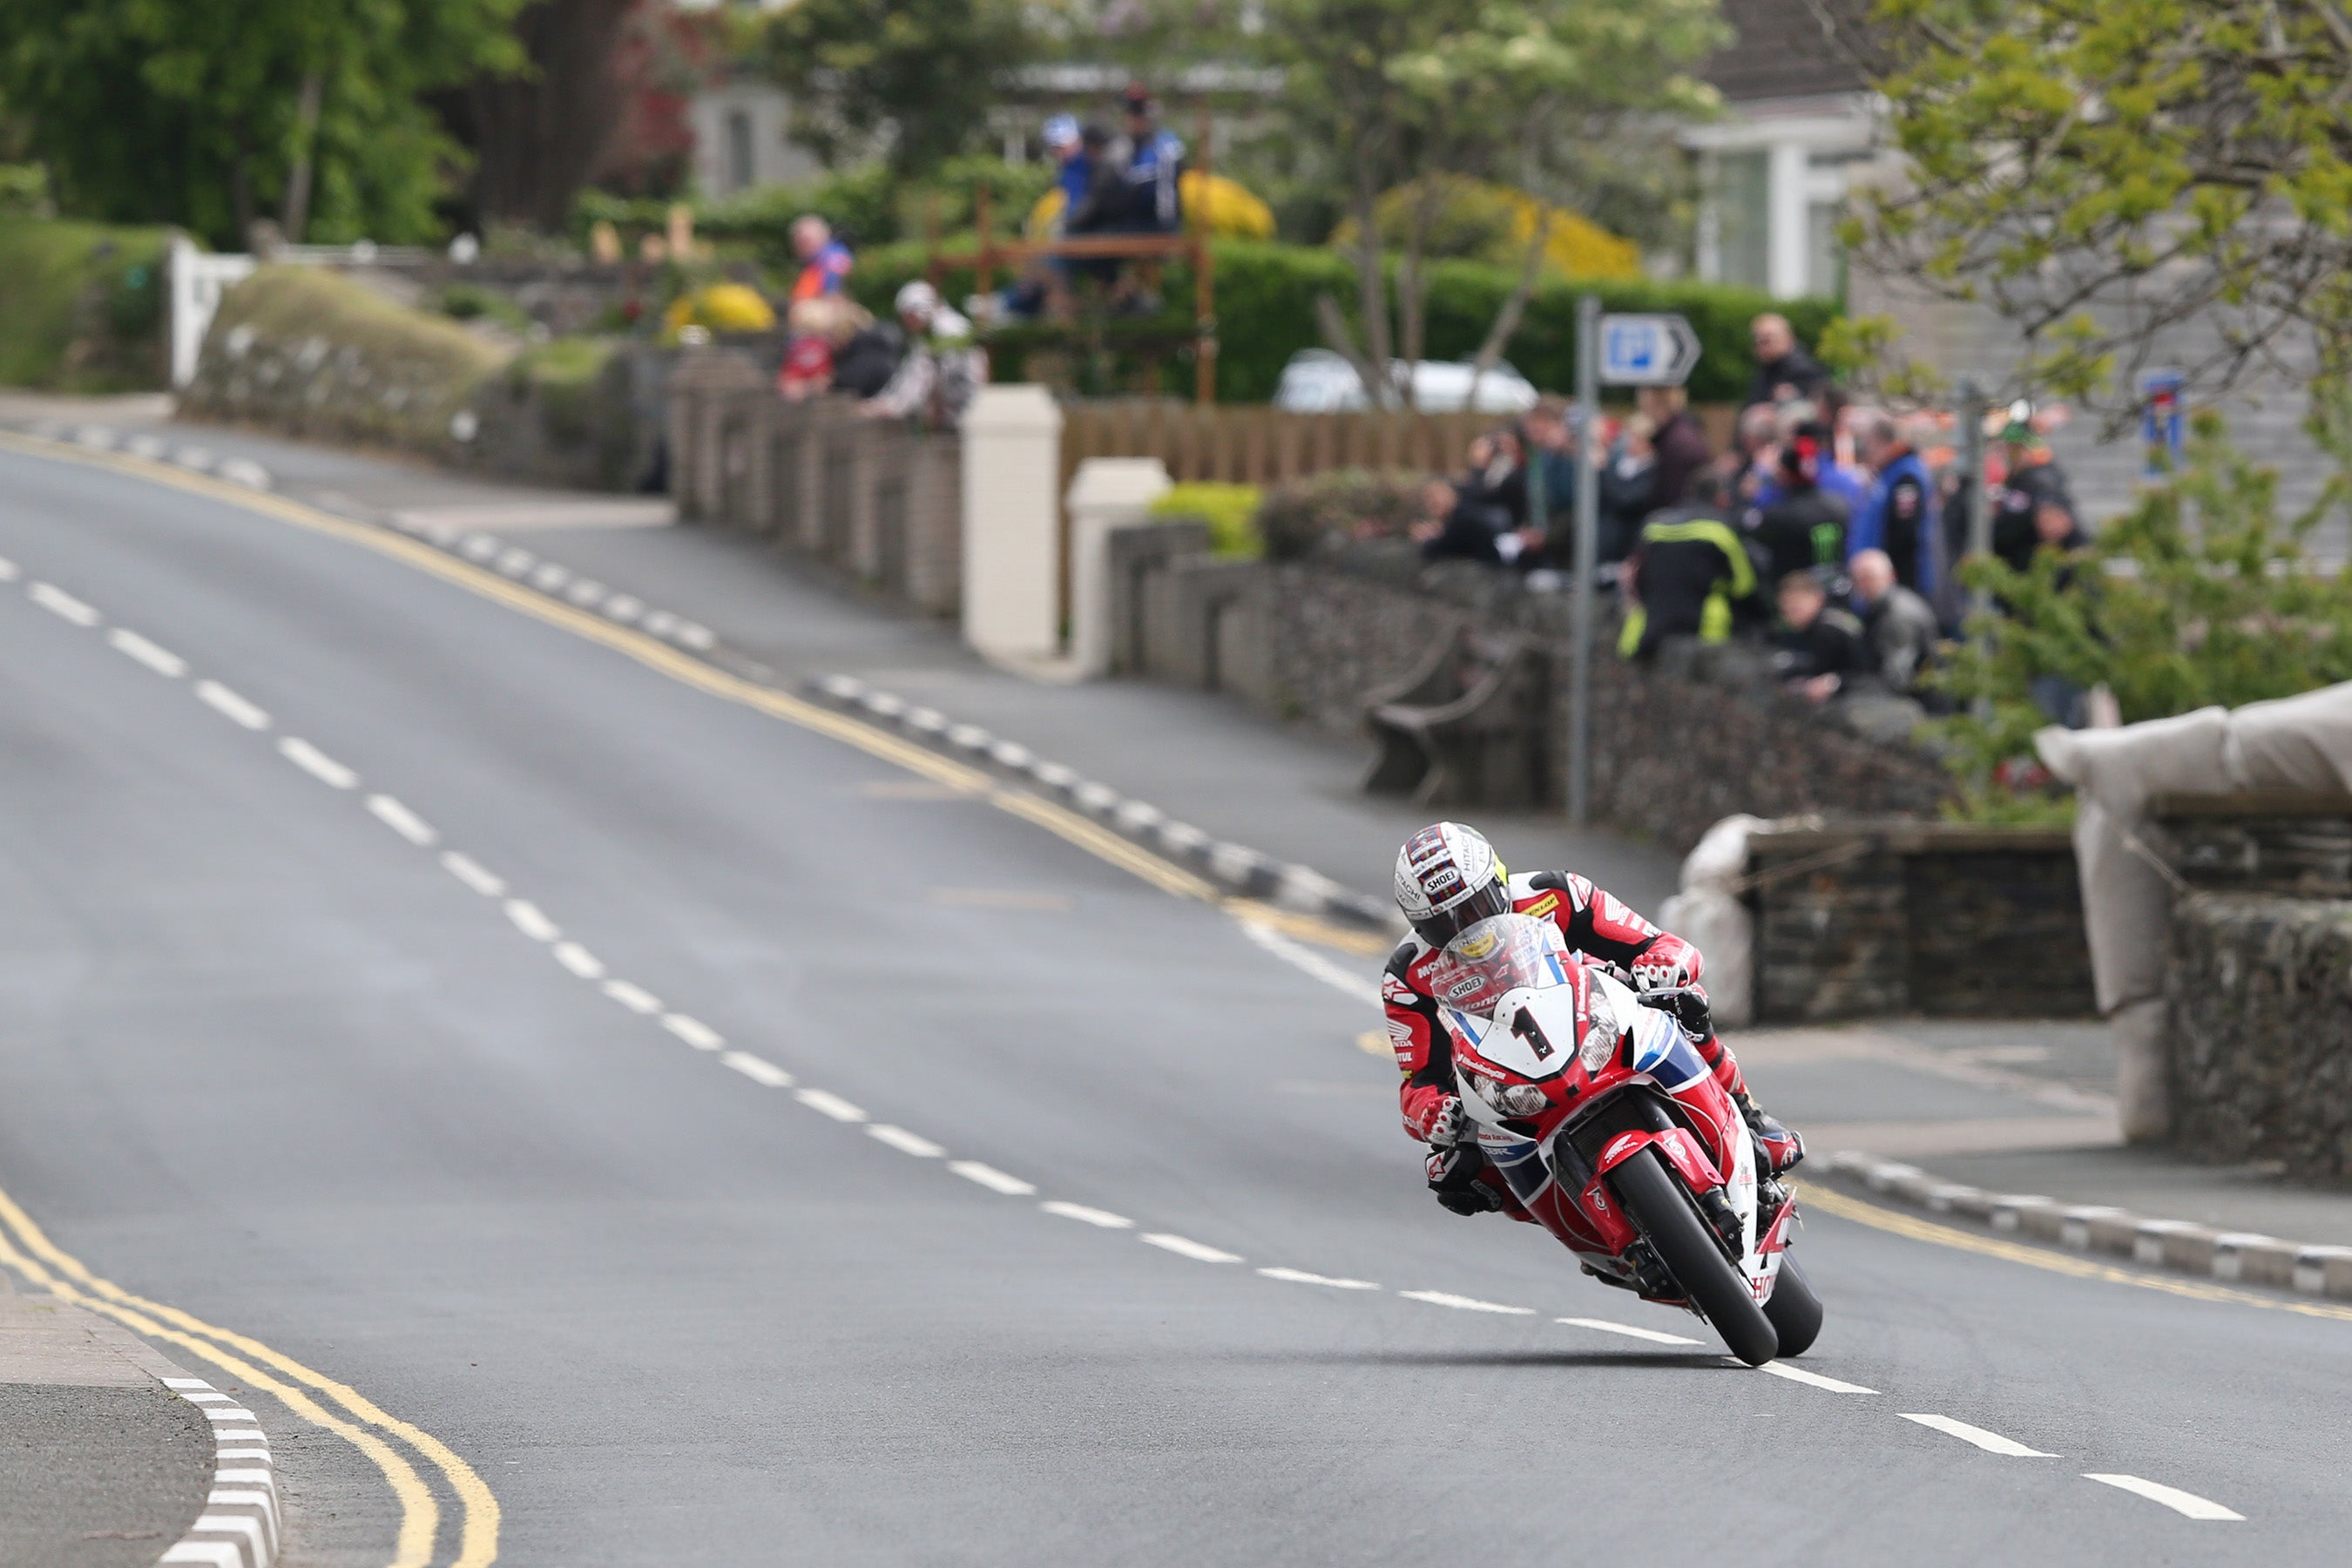 McGuinness has the second most wins of any rider around the TT course